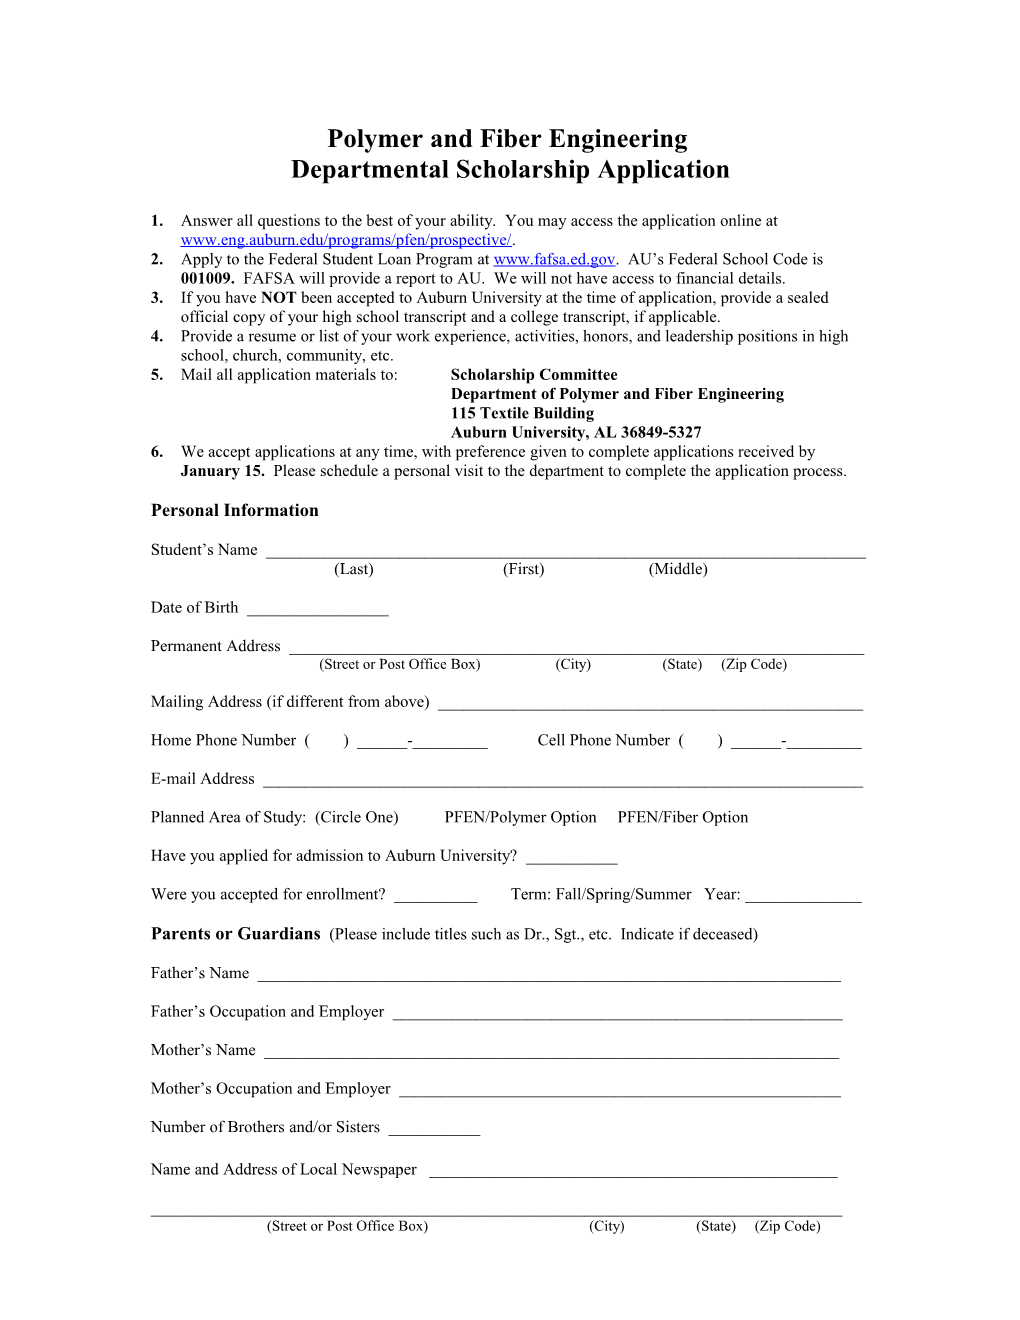 Directions for Completing Application